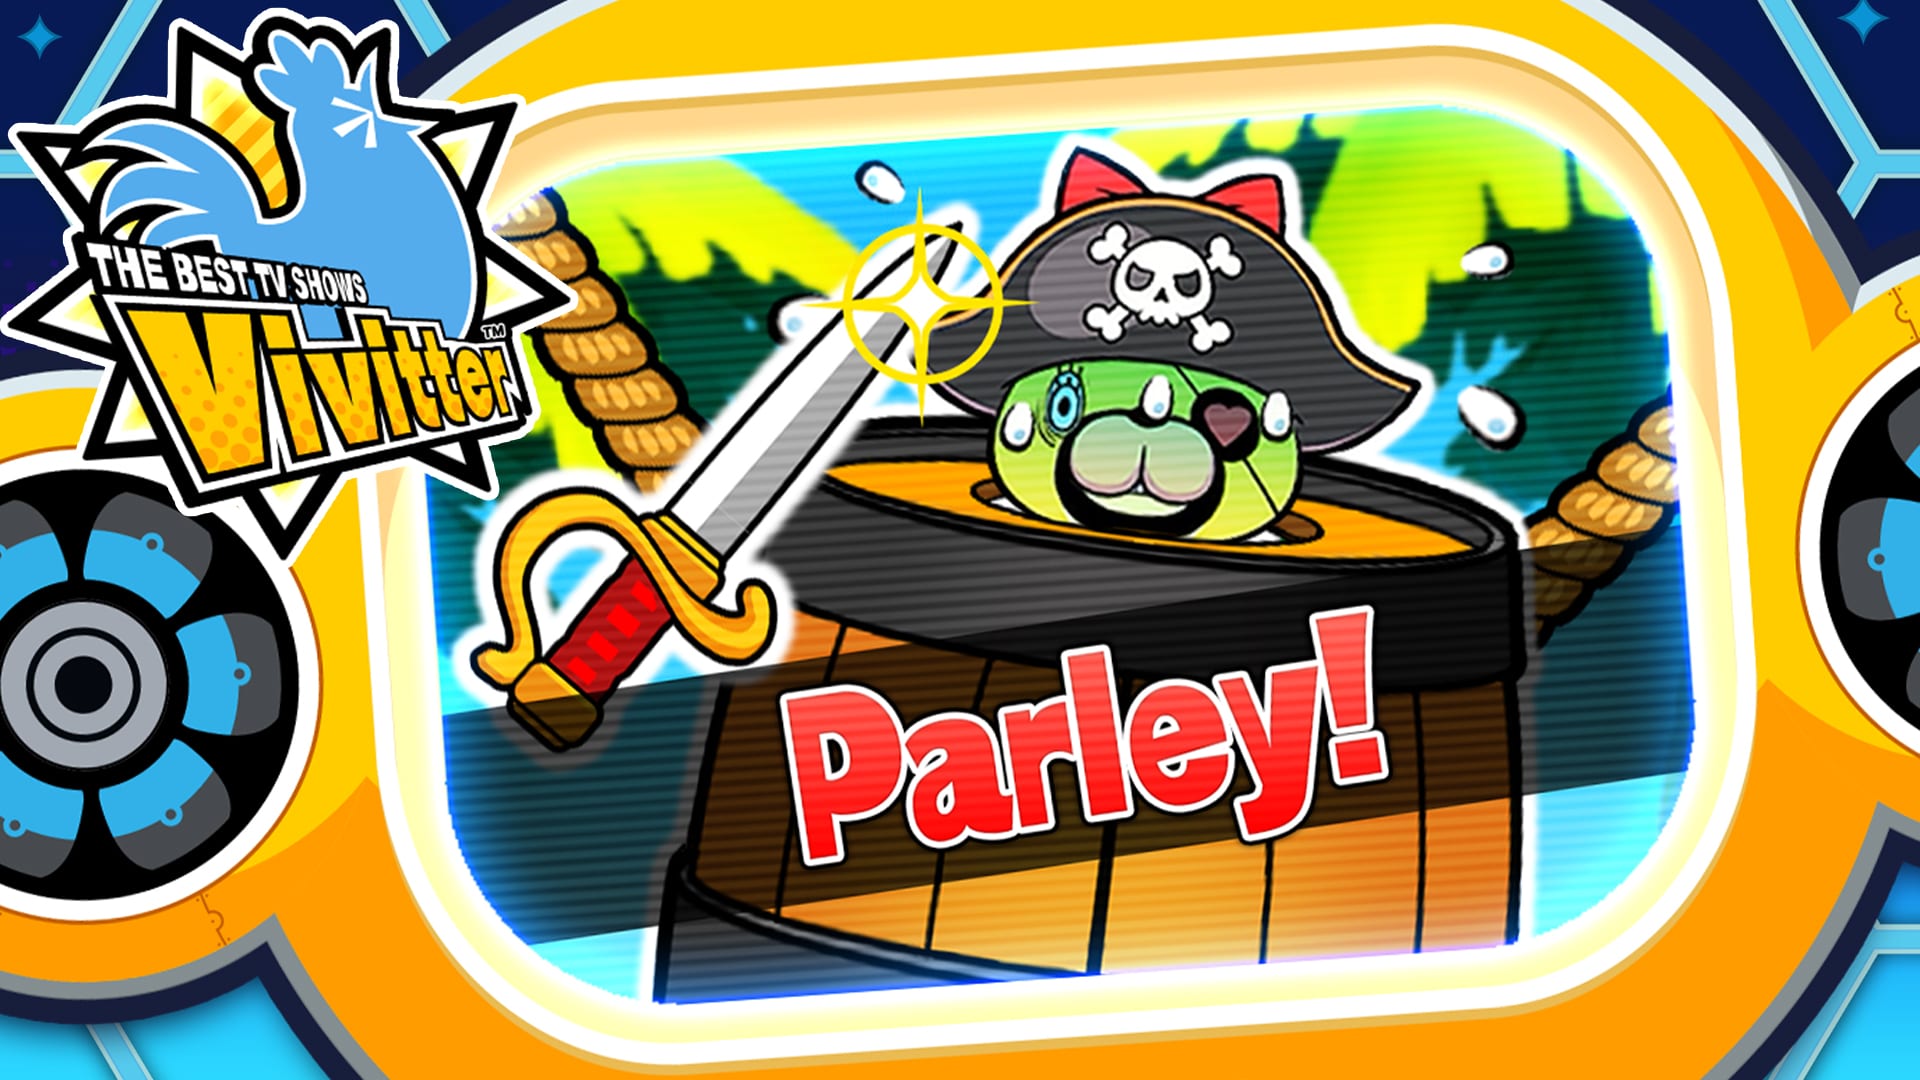 Additional mini-game "Parley!"